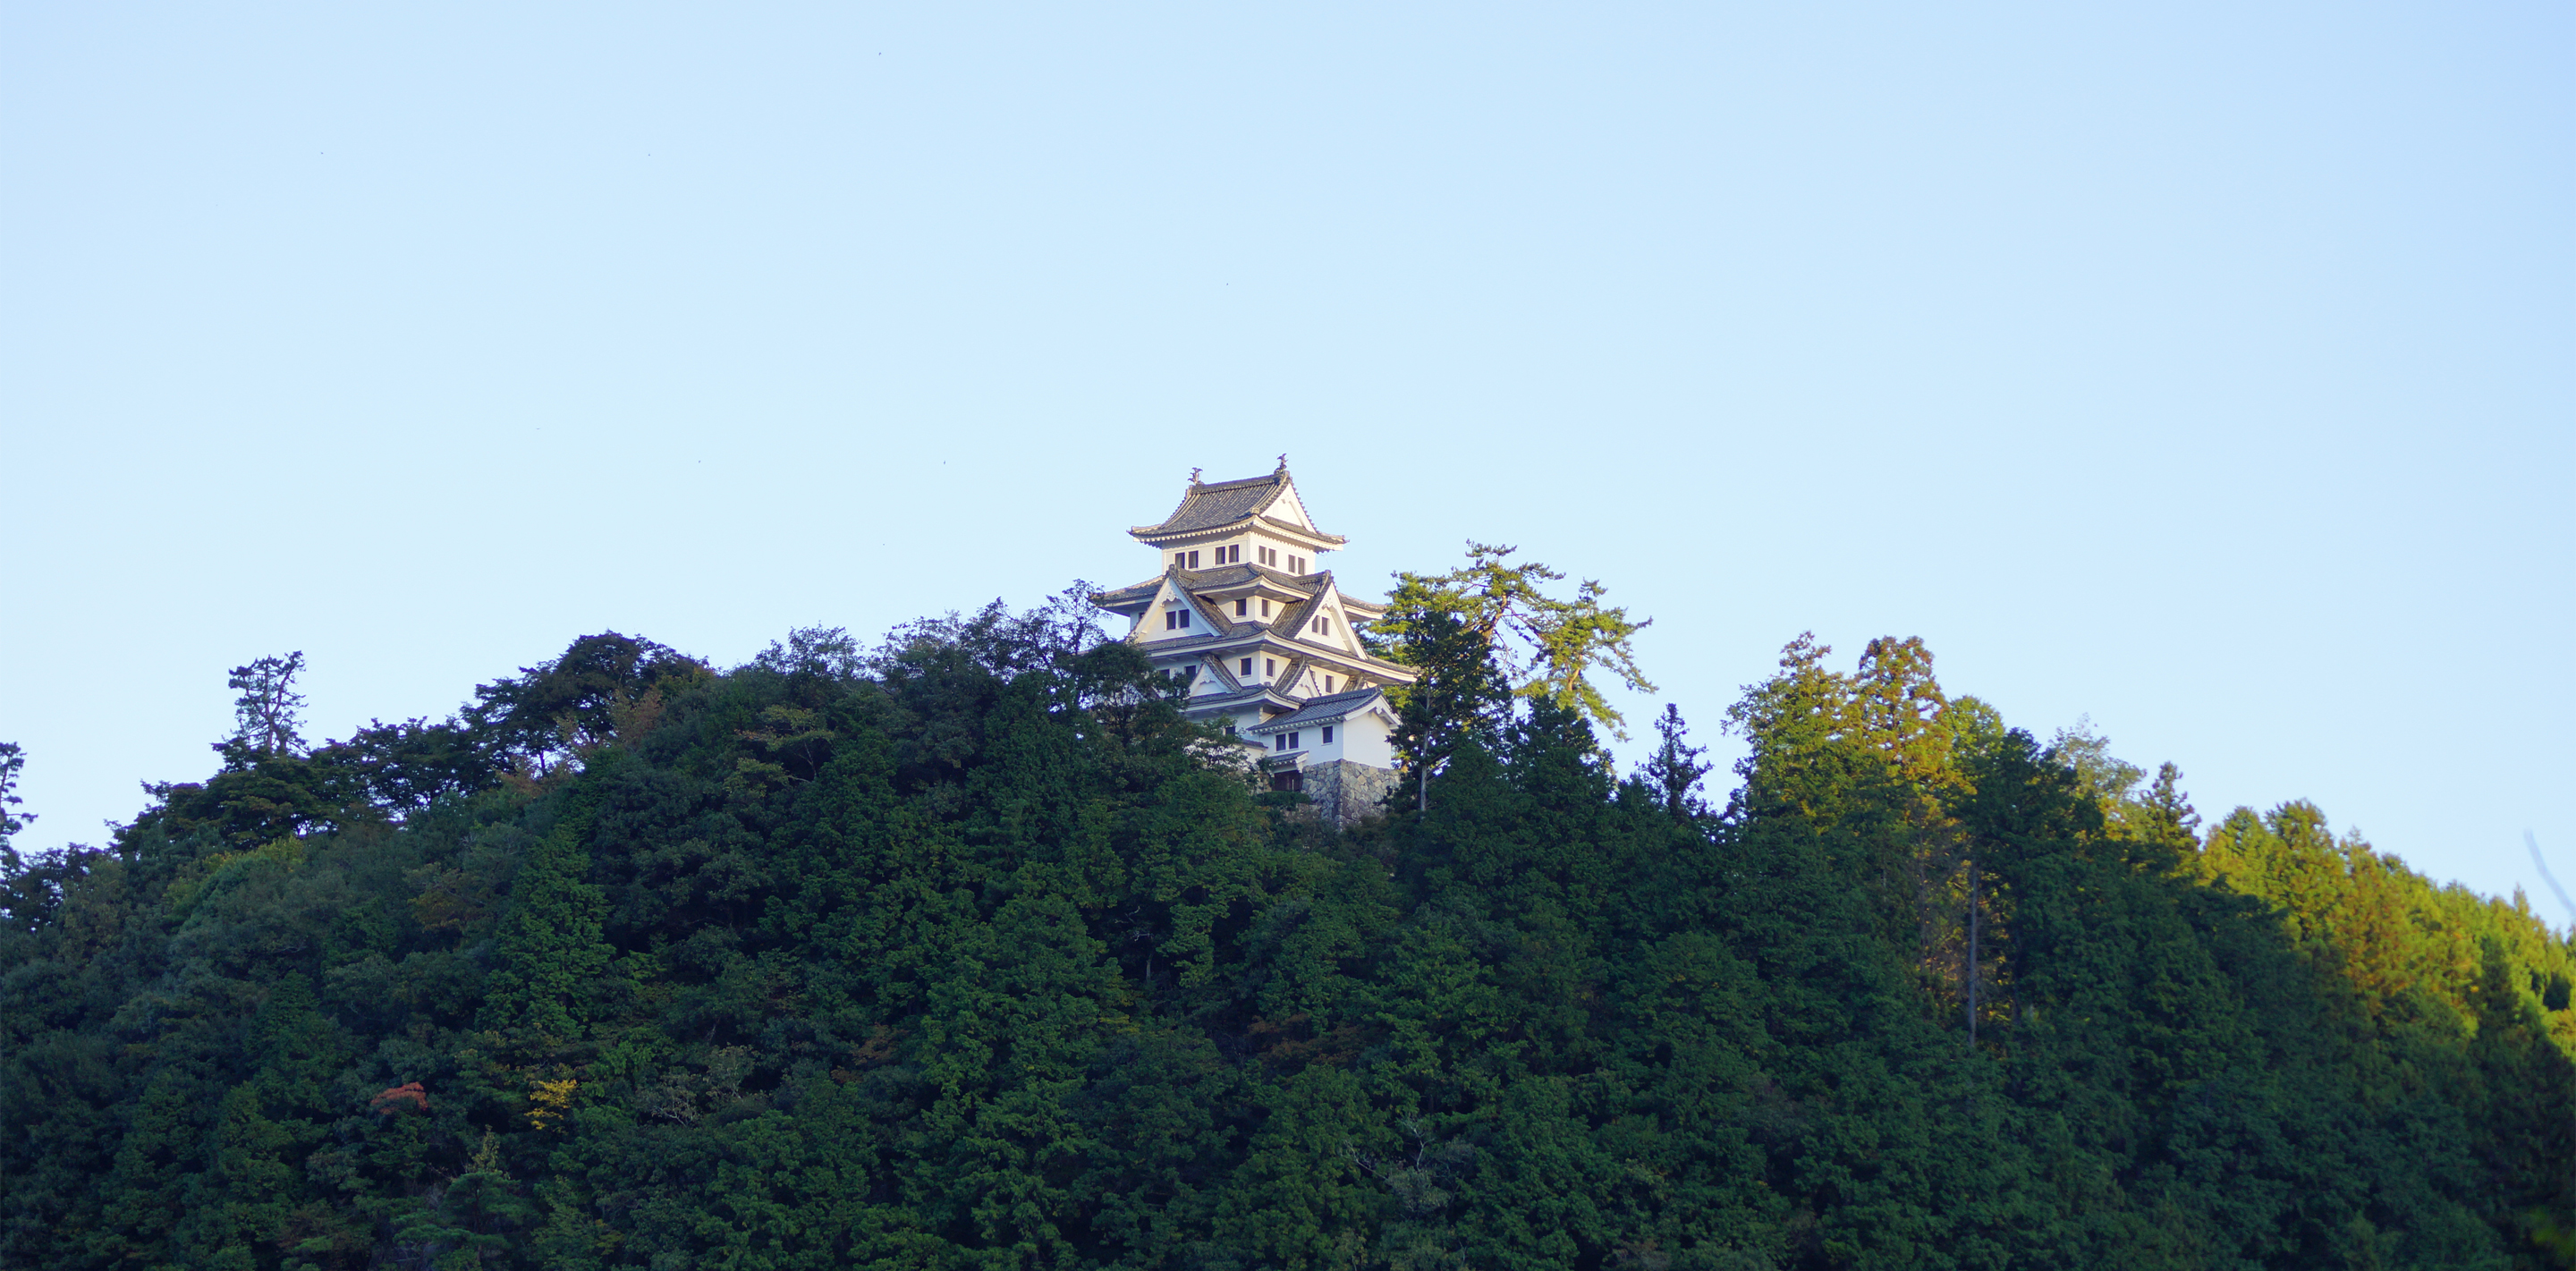 Attractive sightseeing points of Gujo Hachiman Castle